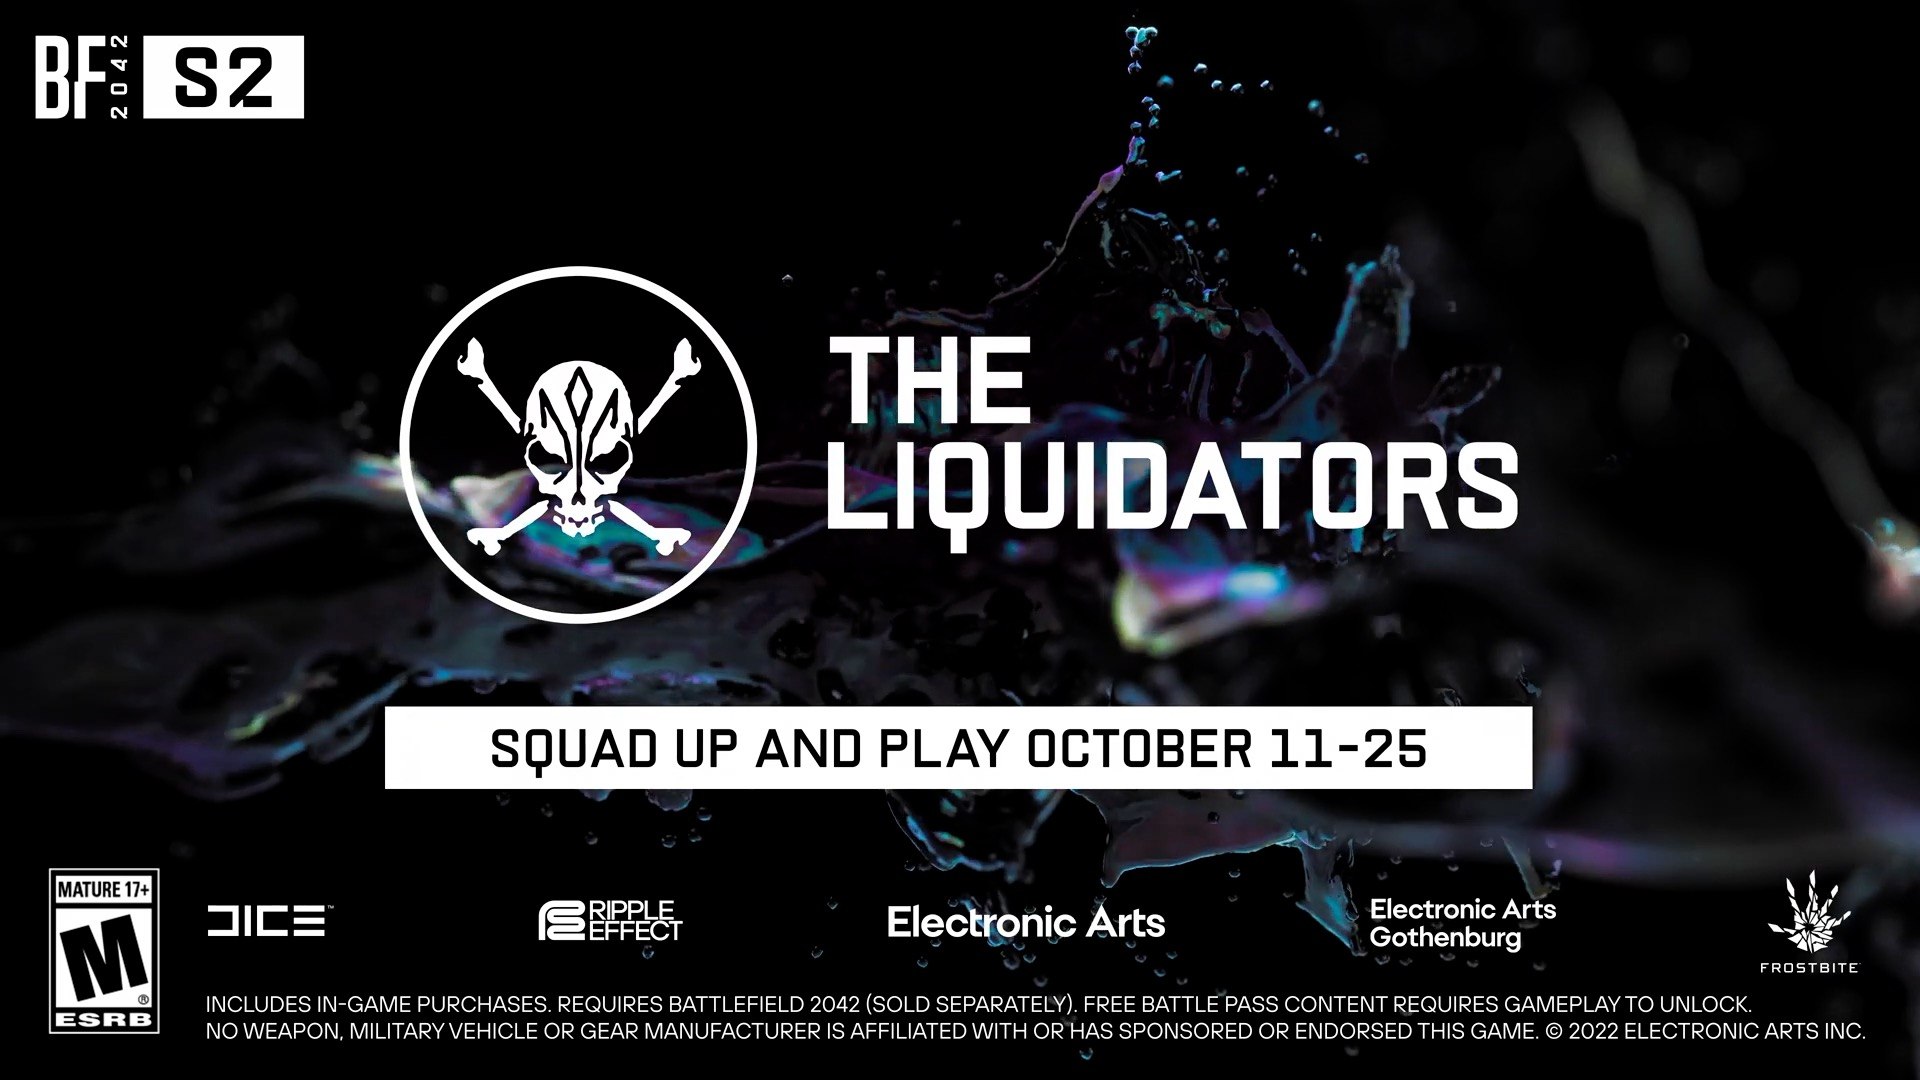 The Liquidators Event To Launch In Battlefield 2042 On October 11th